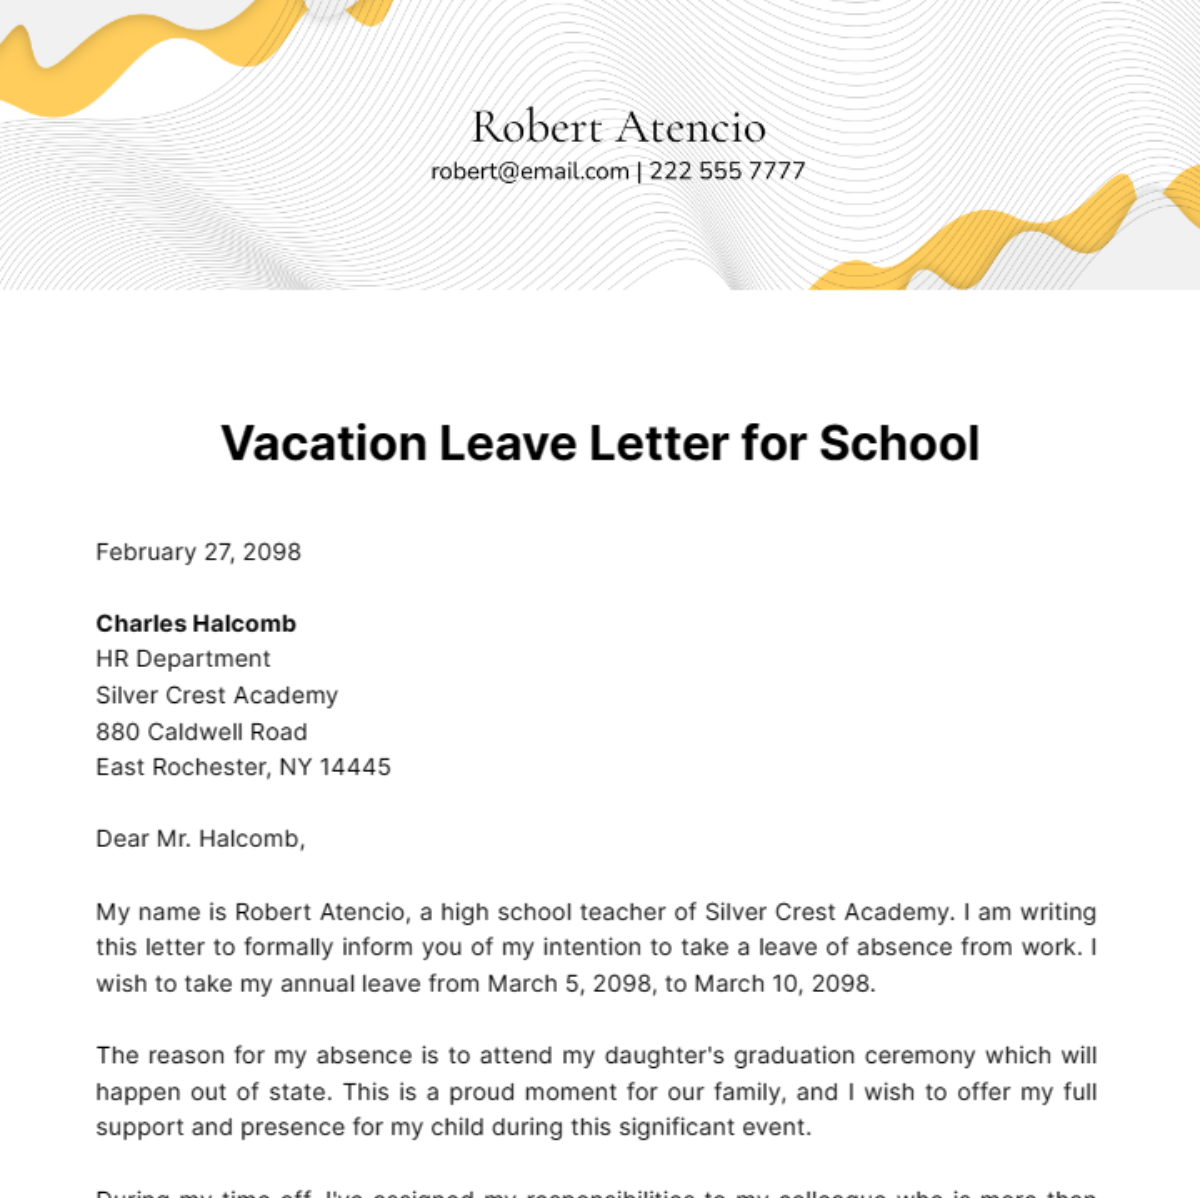 Vacation Leave Letter for School Template